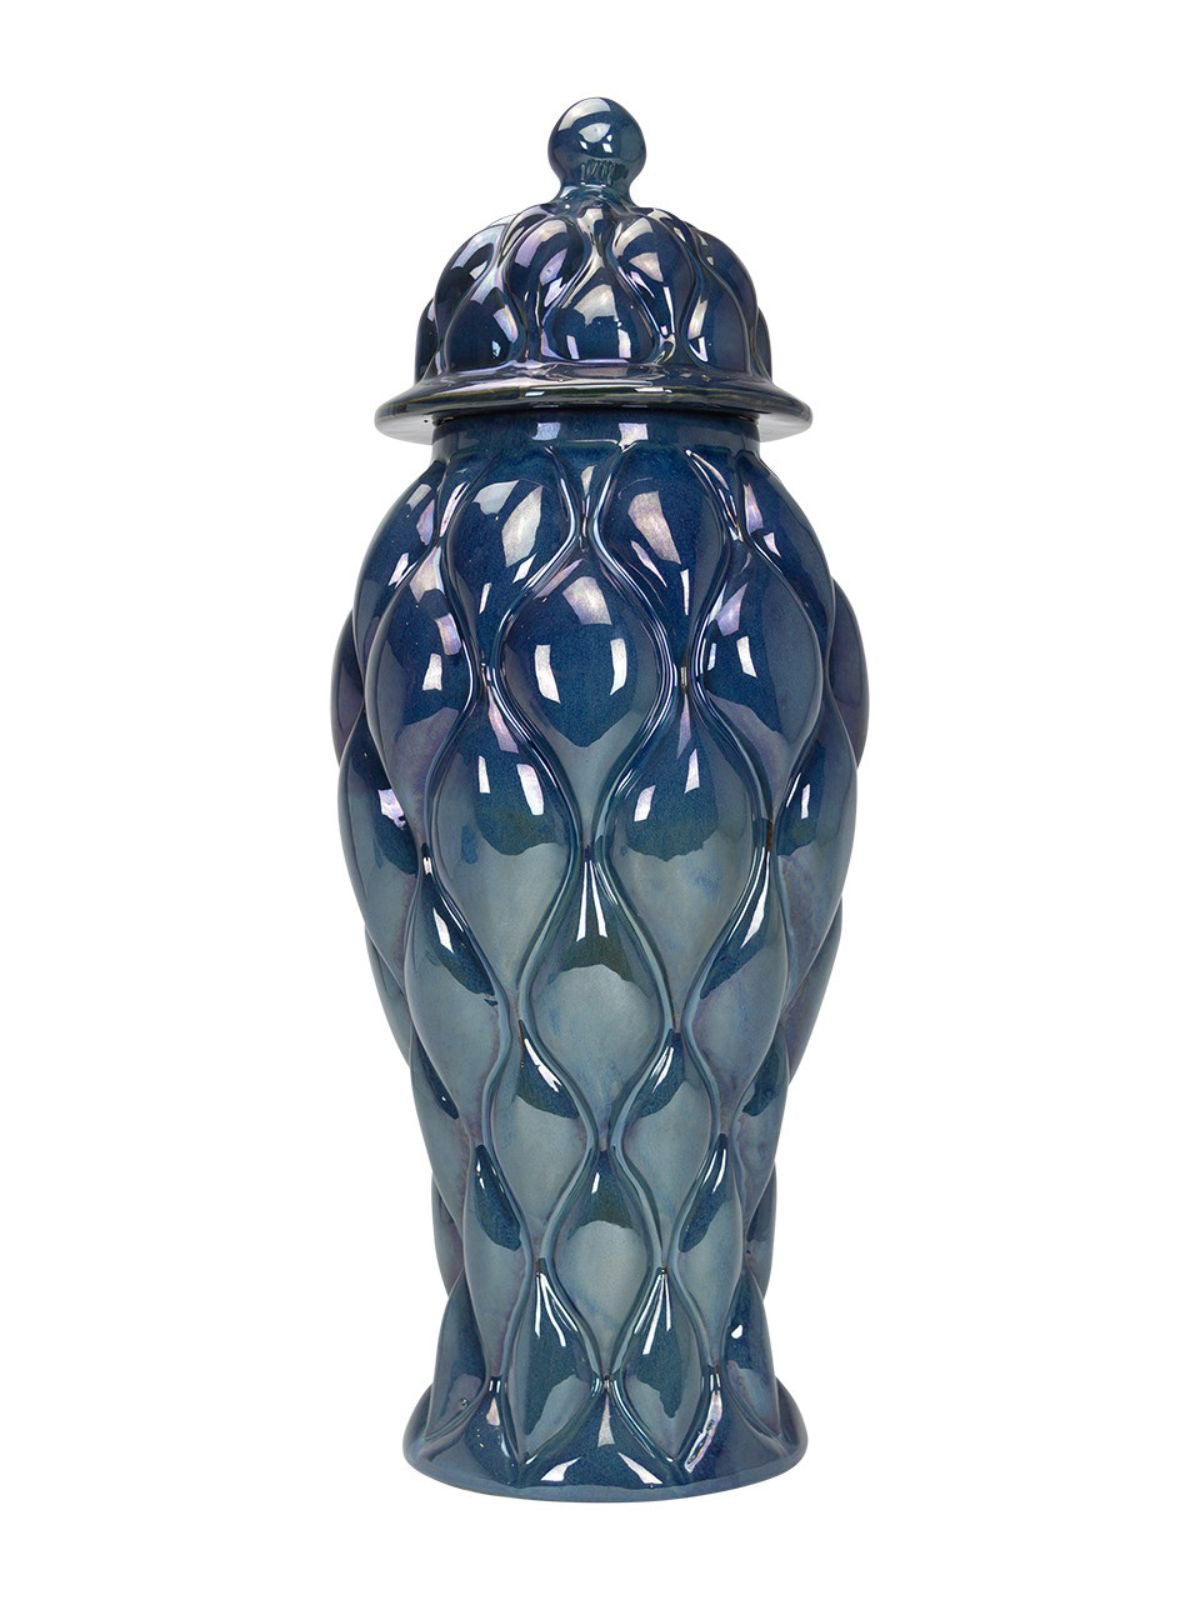 Sapphire Blue Ceramic Ginger Jar with Quilt Pattern And Lid in Size Tall, Sold KYA Home Decor.